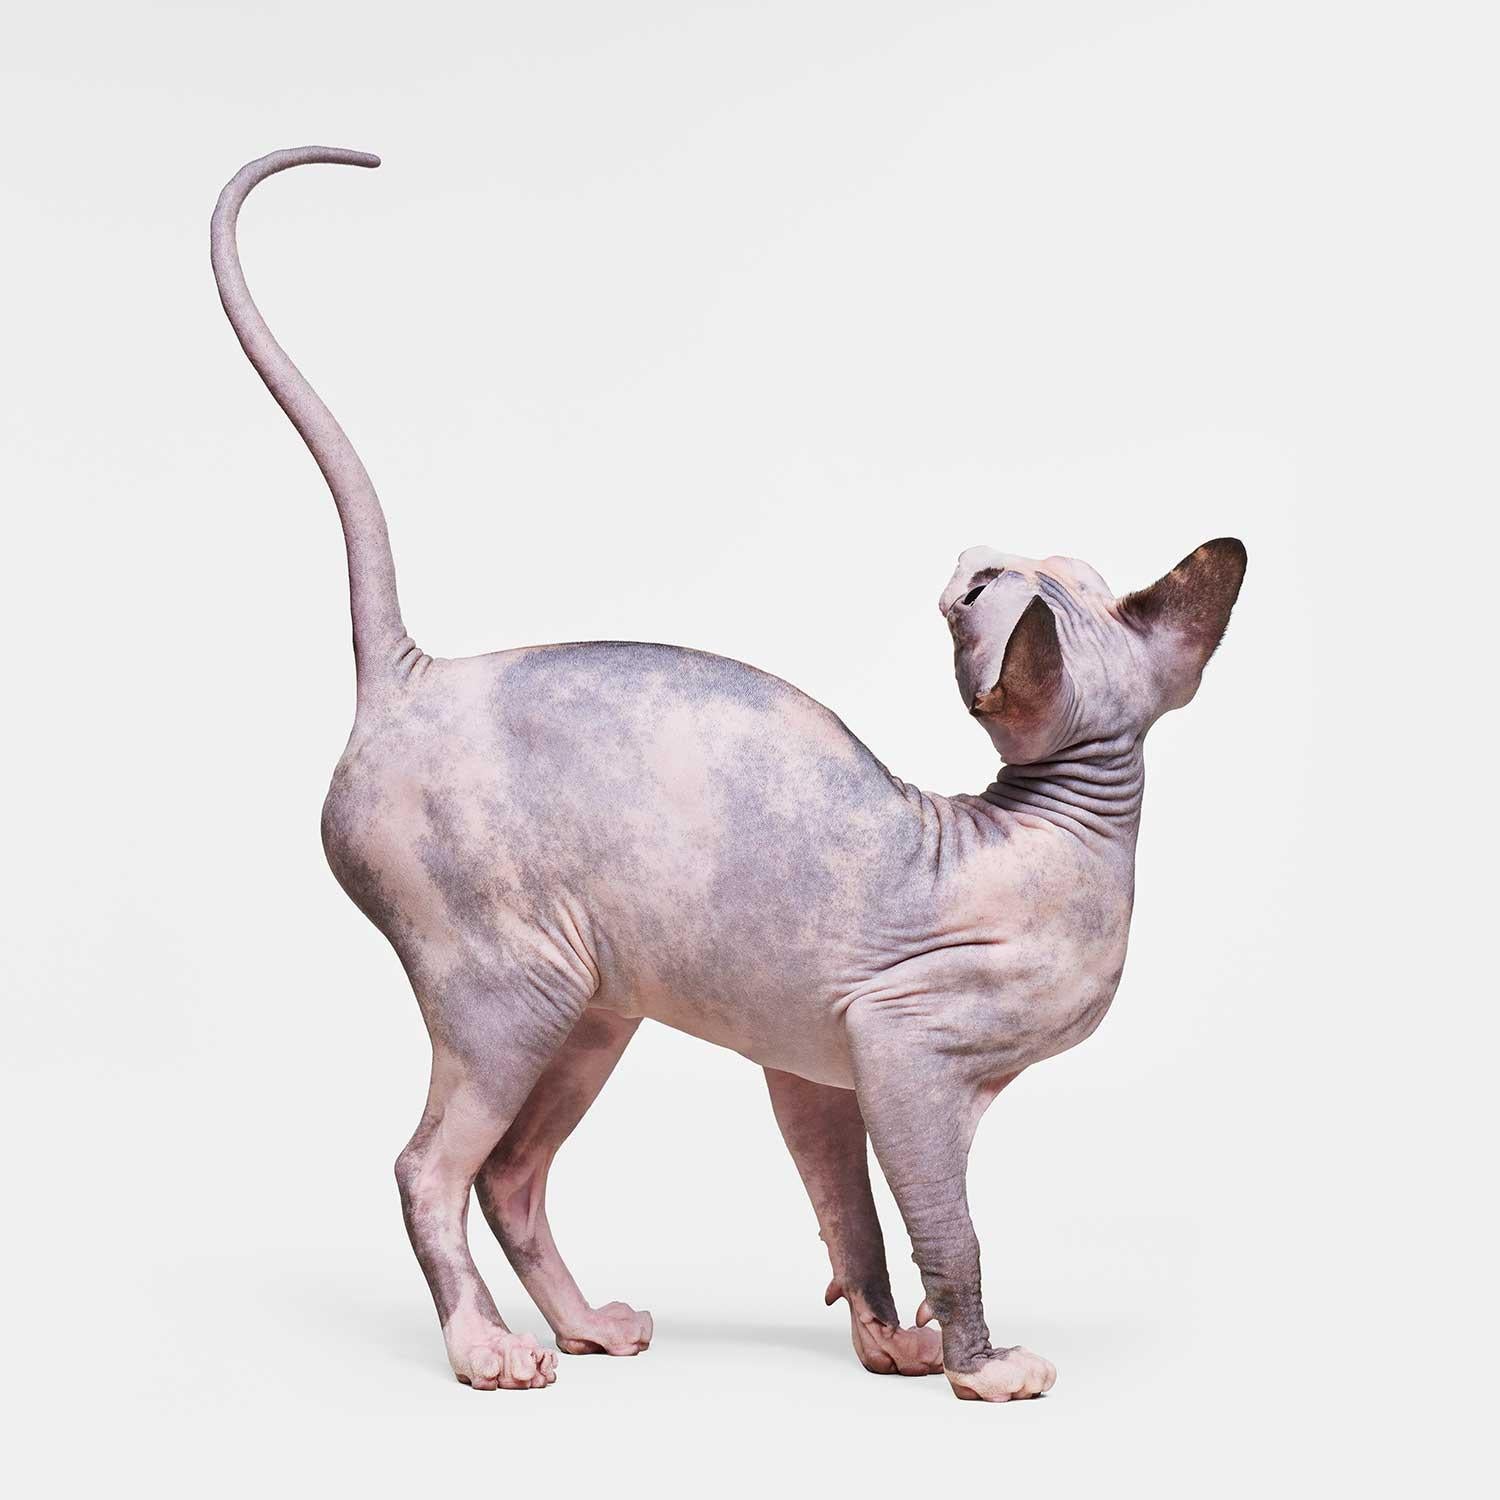 Randal Ford - Sphinx Cat No. 2, Photography 2018, Printed After